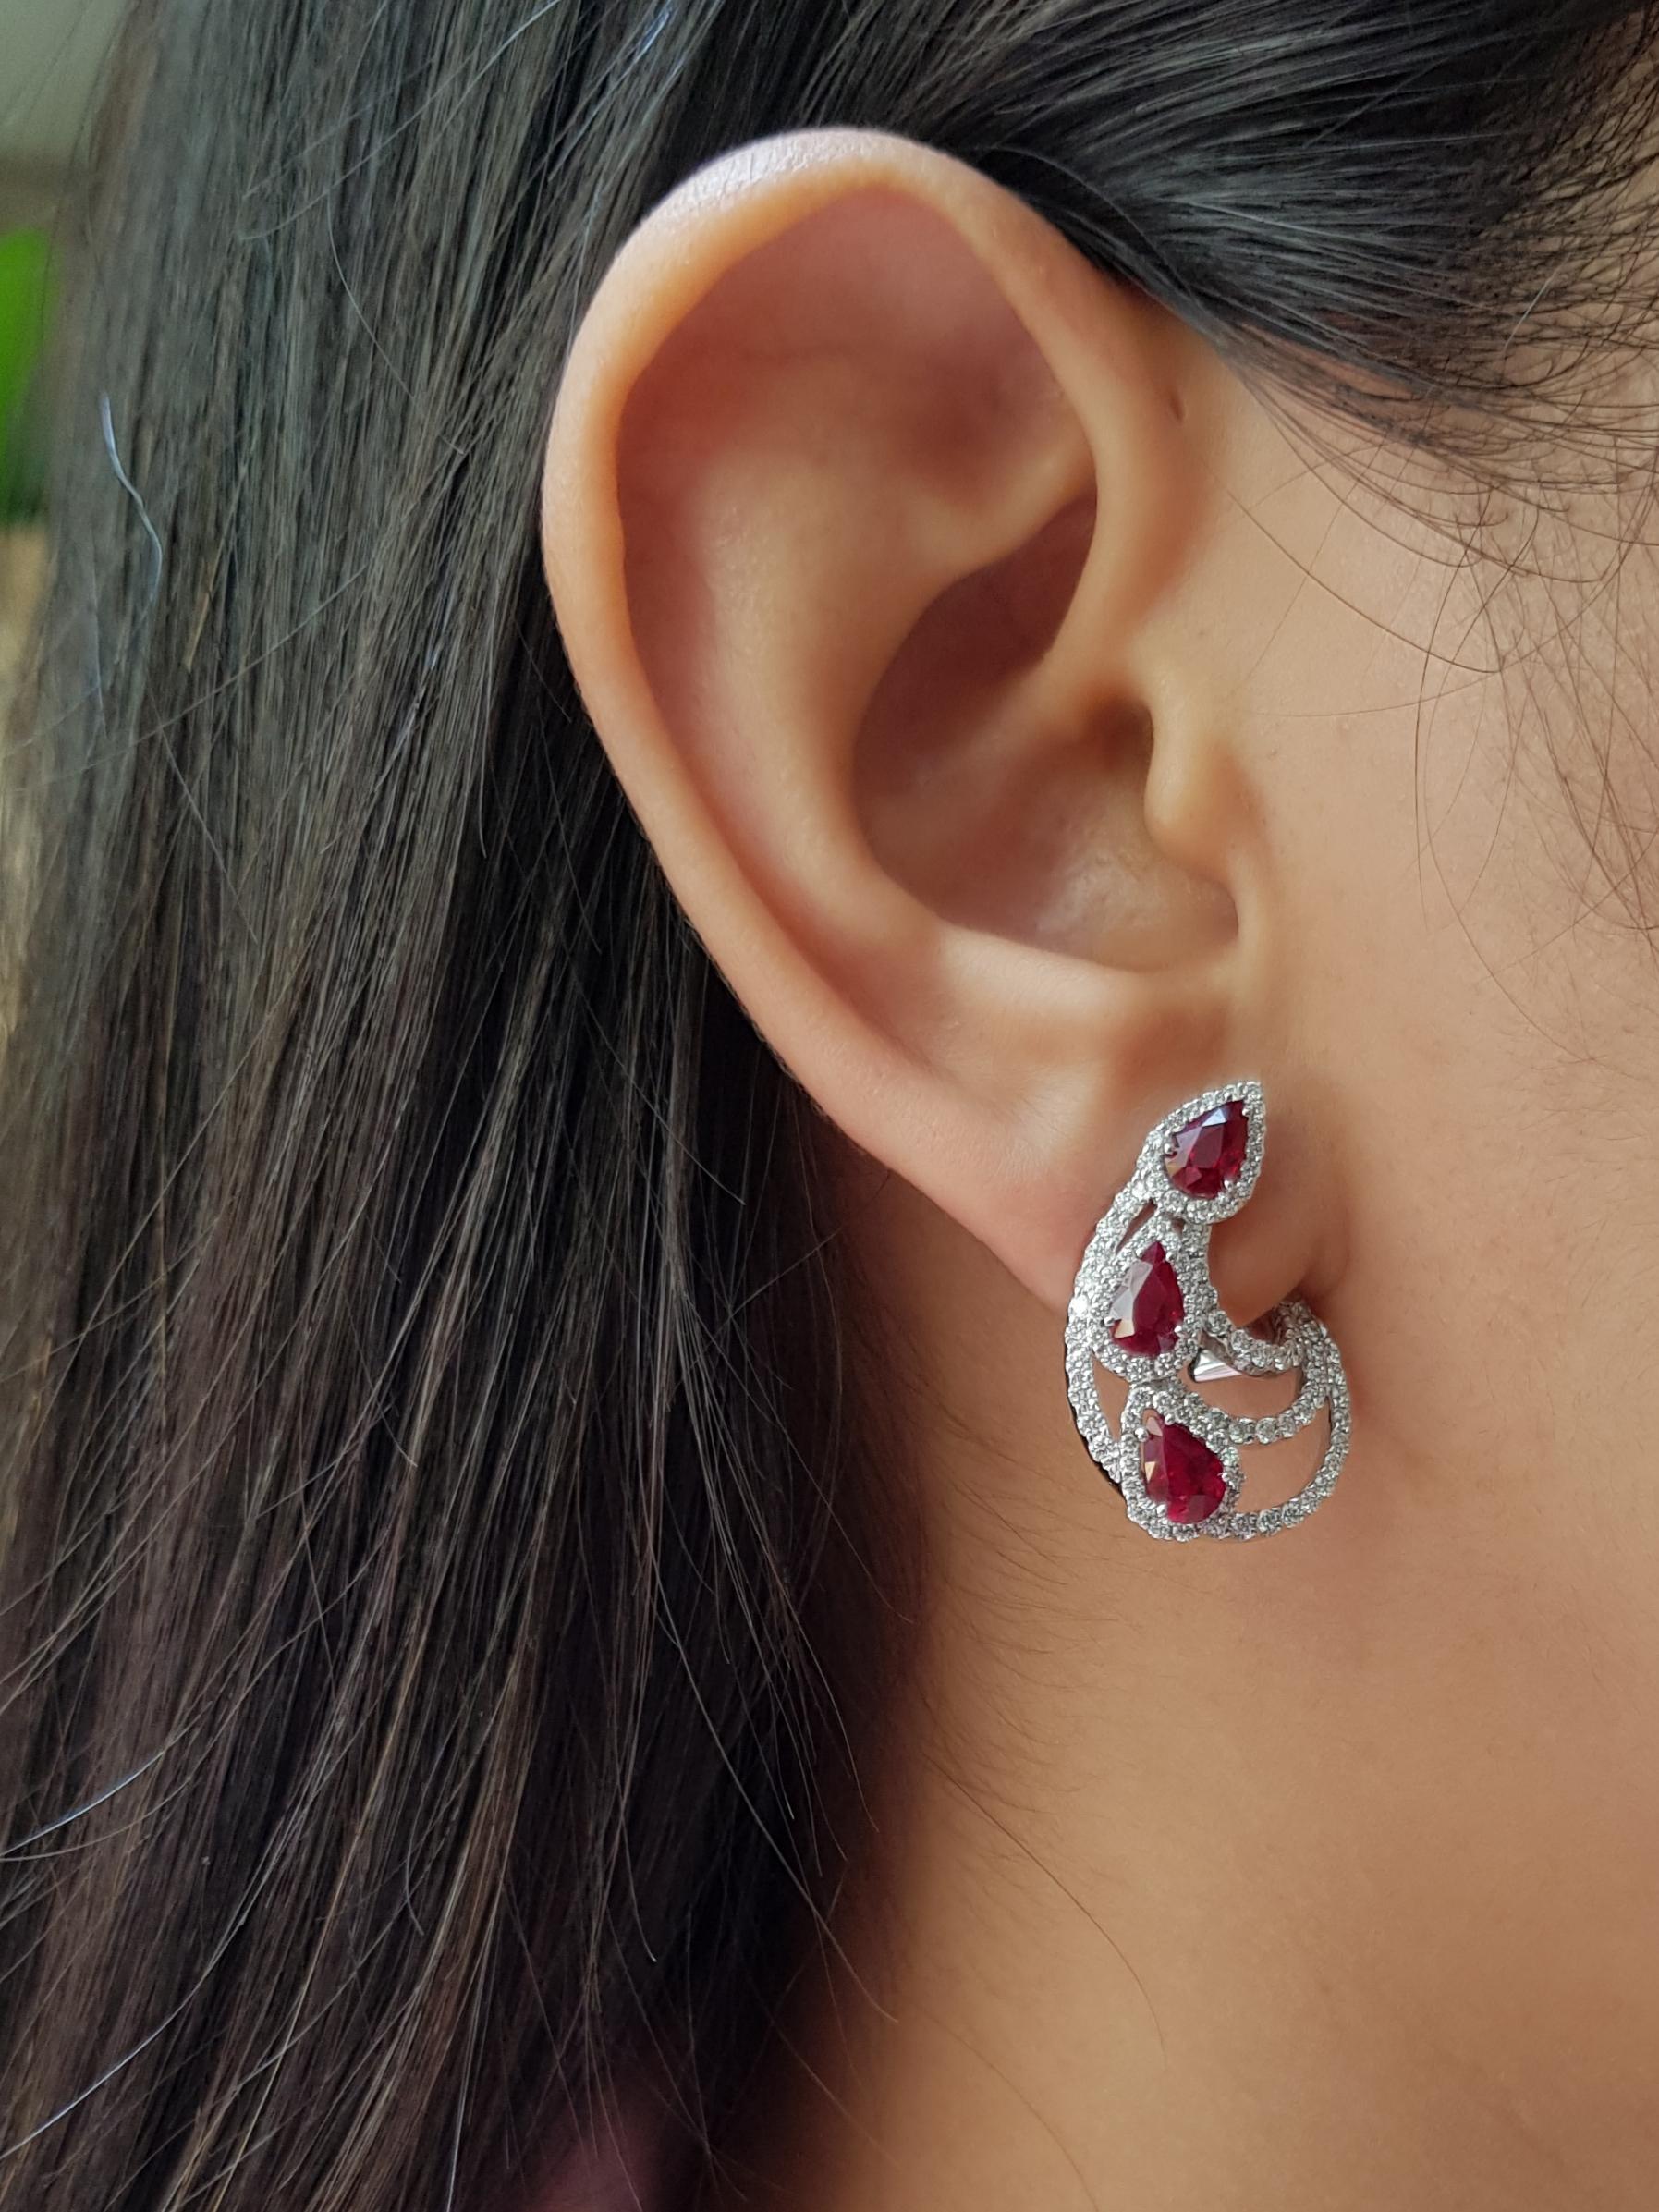 Ruby 2.77 carats with Diamond 1.25 carats Earrings set in 18 Karat White Gold Settings

Width: 1.8 cm
Length: 2.5 cm 

